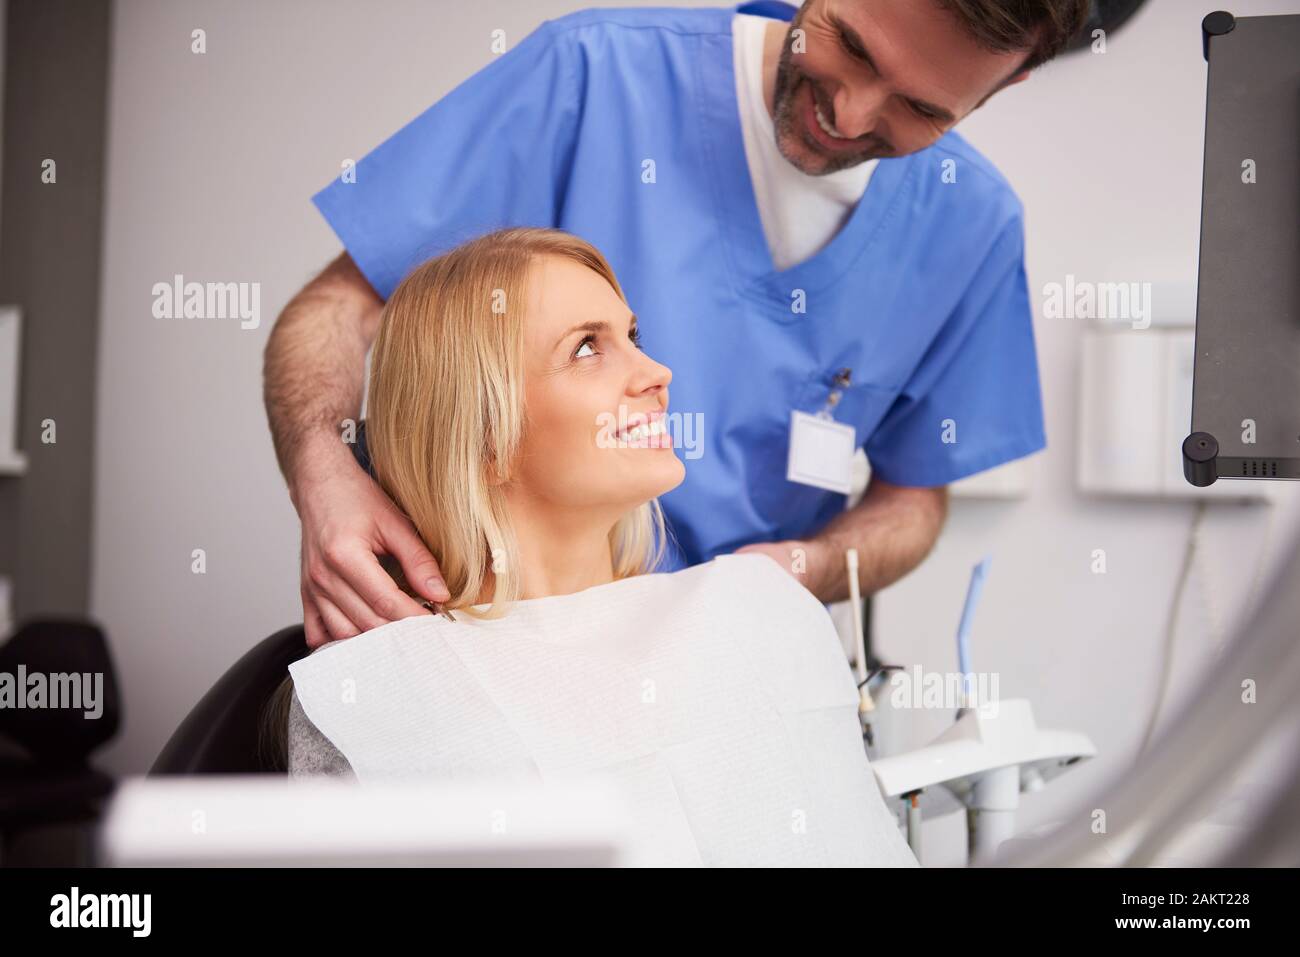 Young woman during dental appointment Stock Photo